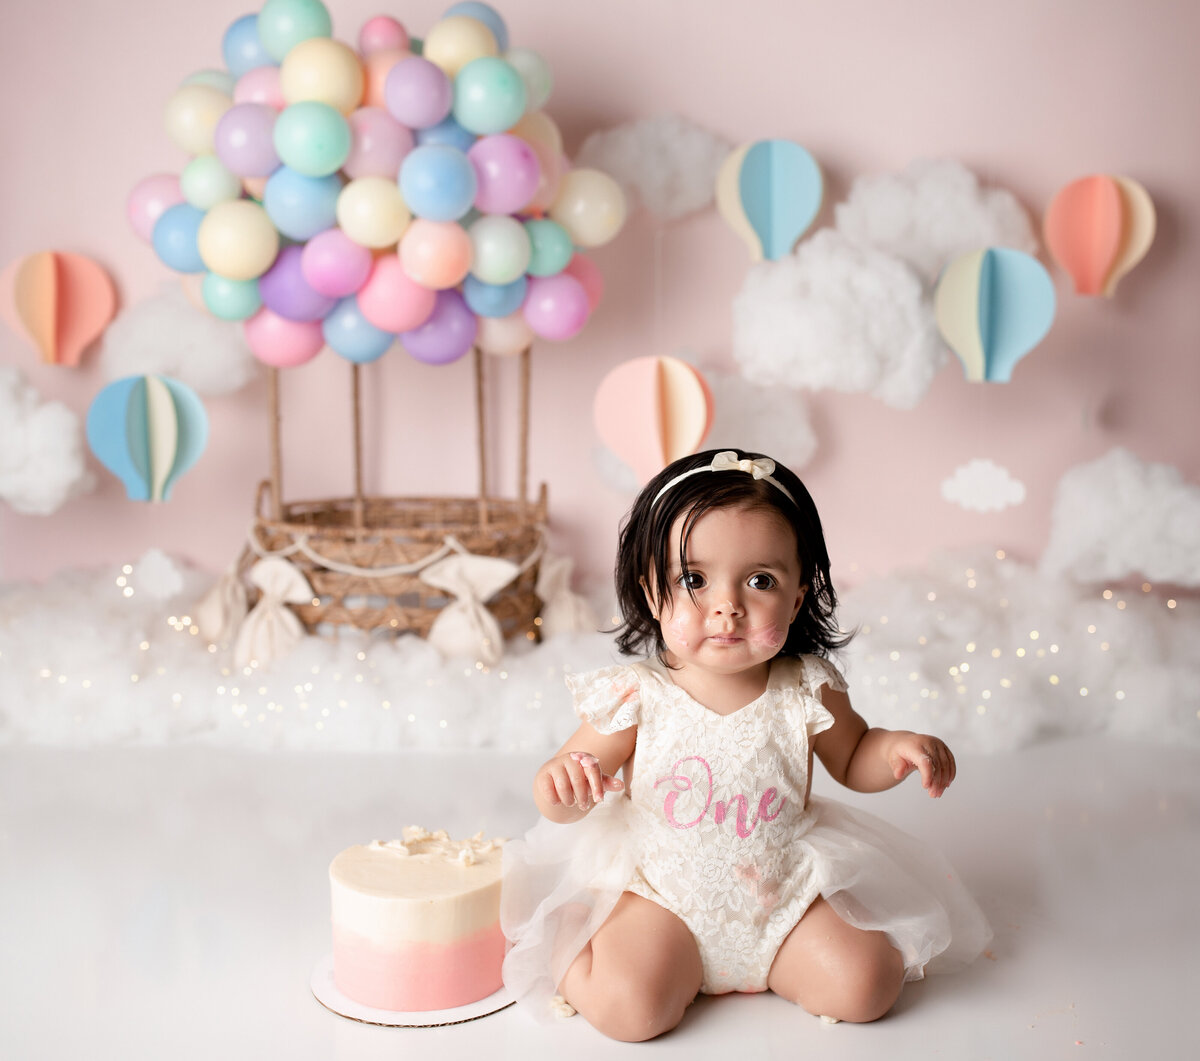 Girly hot air balloon themed cake smash in West Palm Beach, FL newborn and cake smash photography studio.  Baby girl is sitting on her knees in a white dress looking at the camera with a pink ombre cake beside her. in the background, there are pastel-colored hot air balloons, faux clouds and twinkle lights.